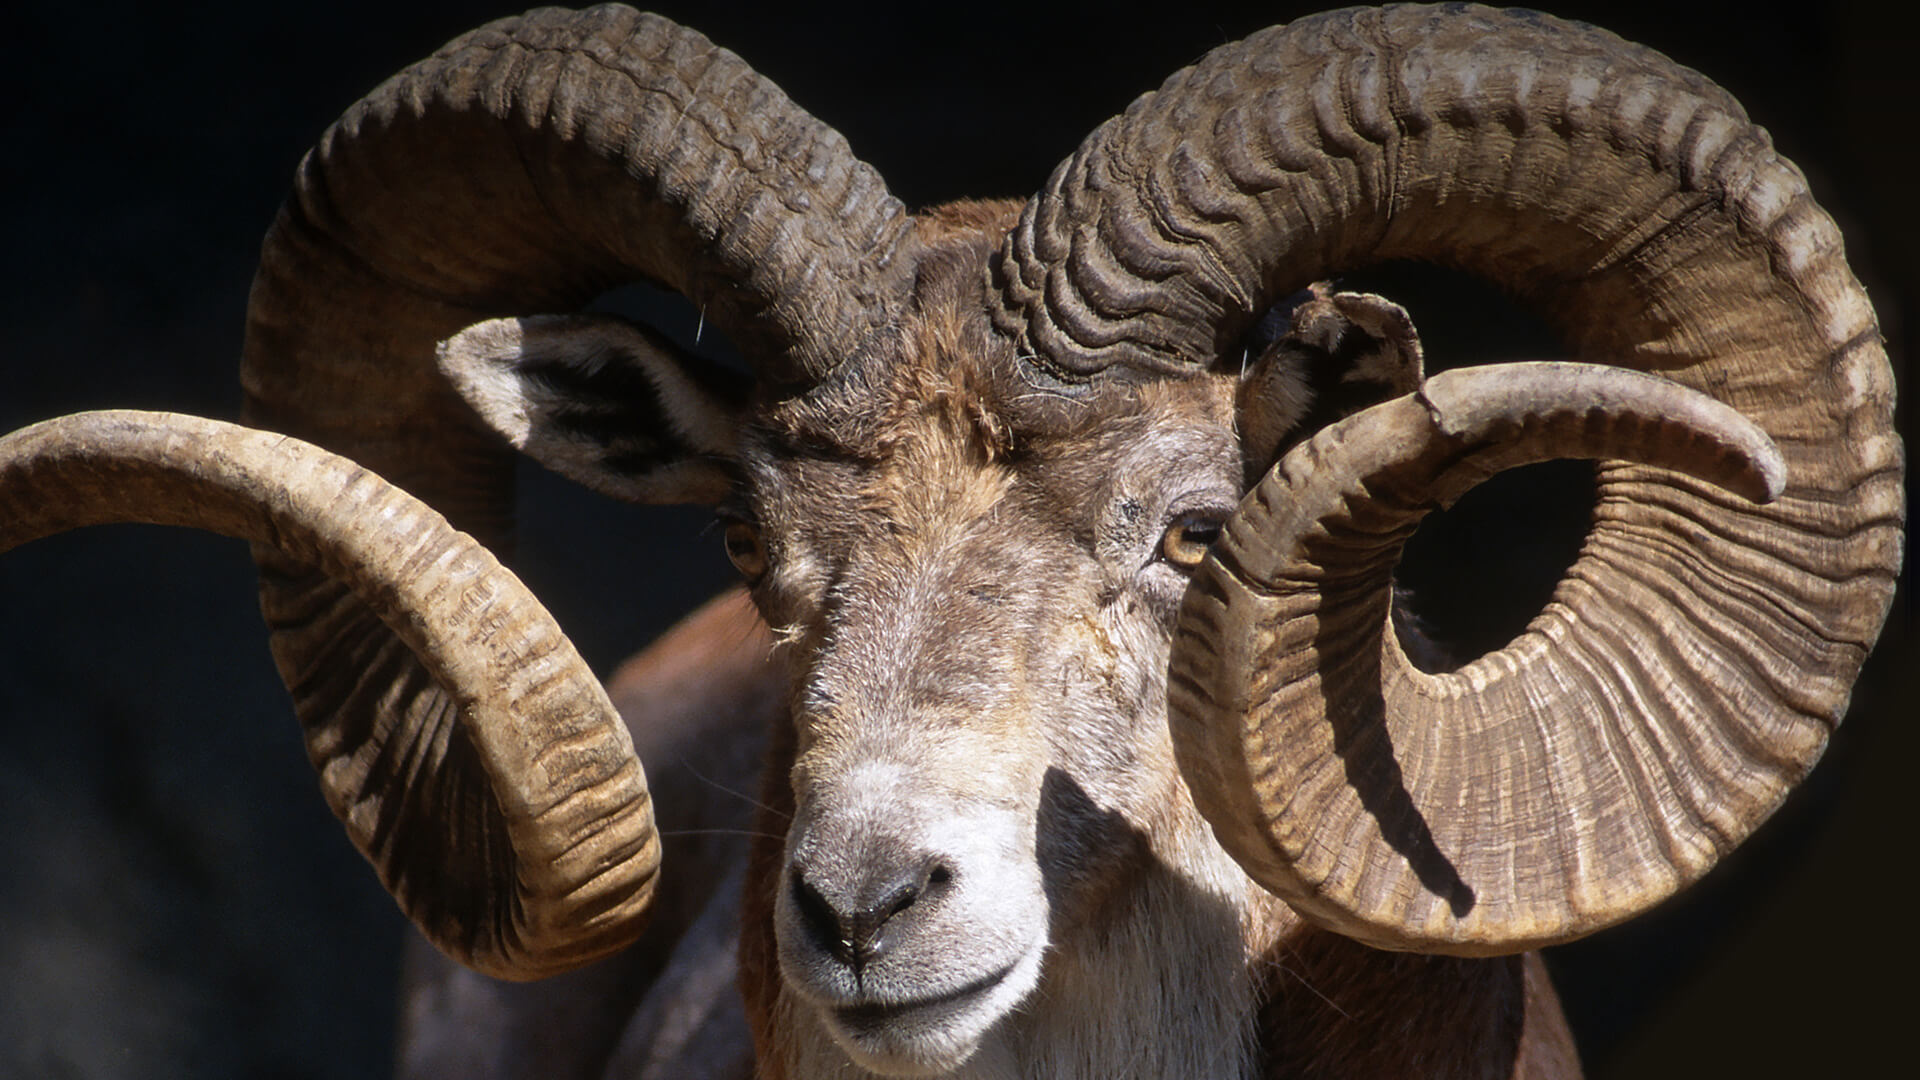 Closeup of a male Trandcaspian urial displaying his large, curved horns